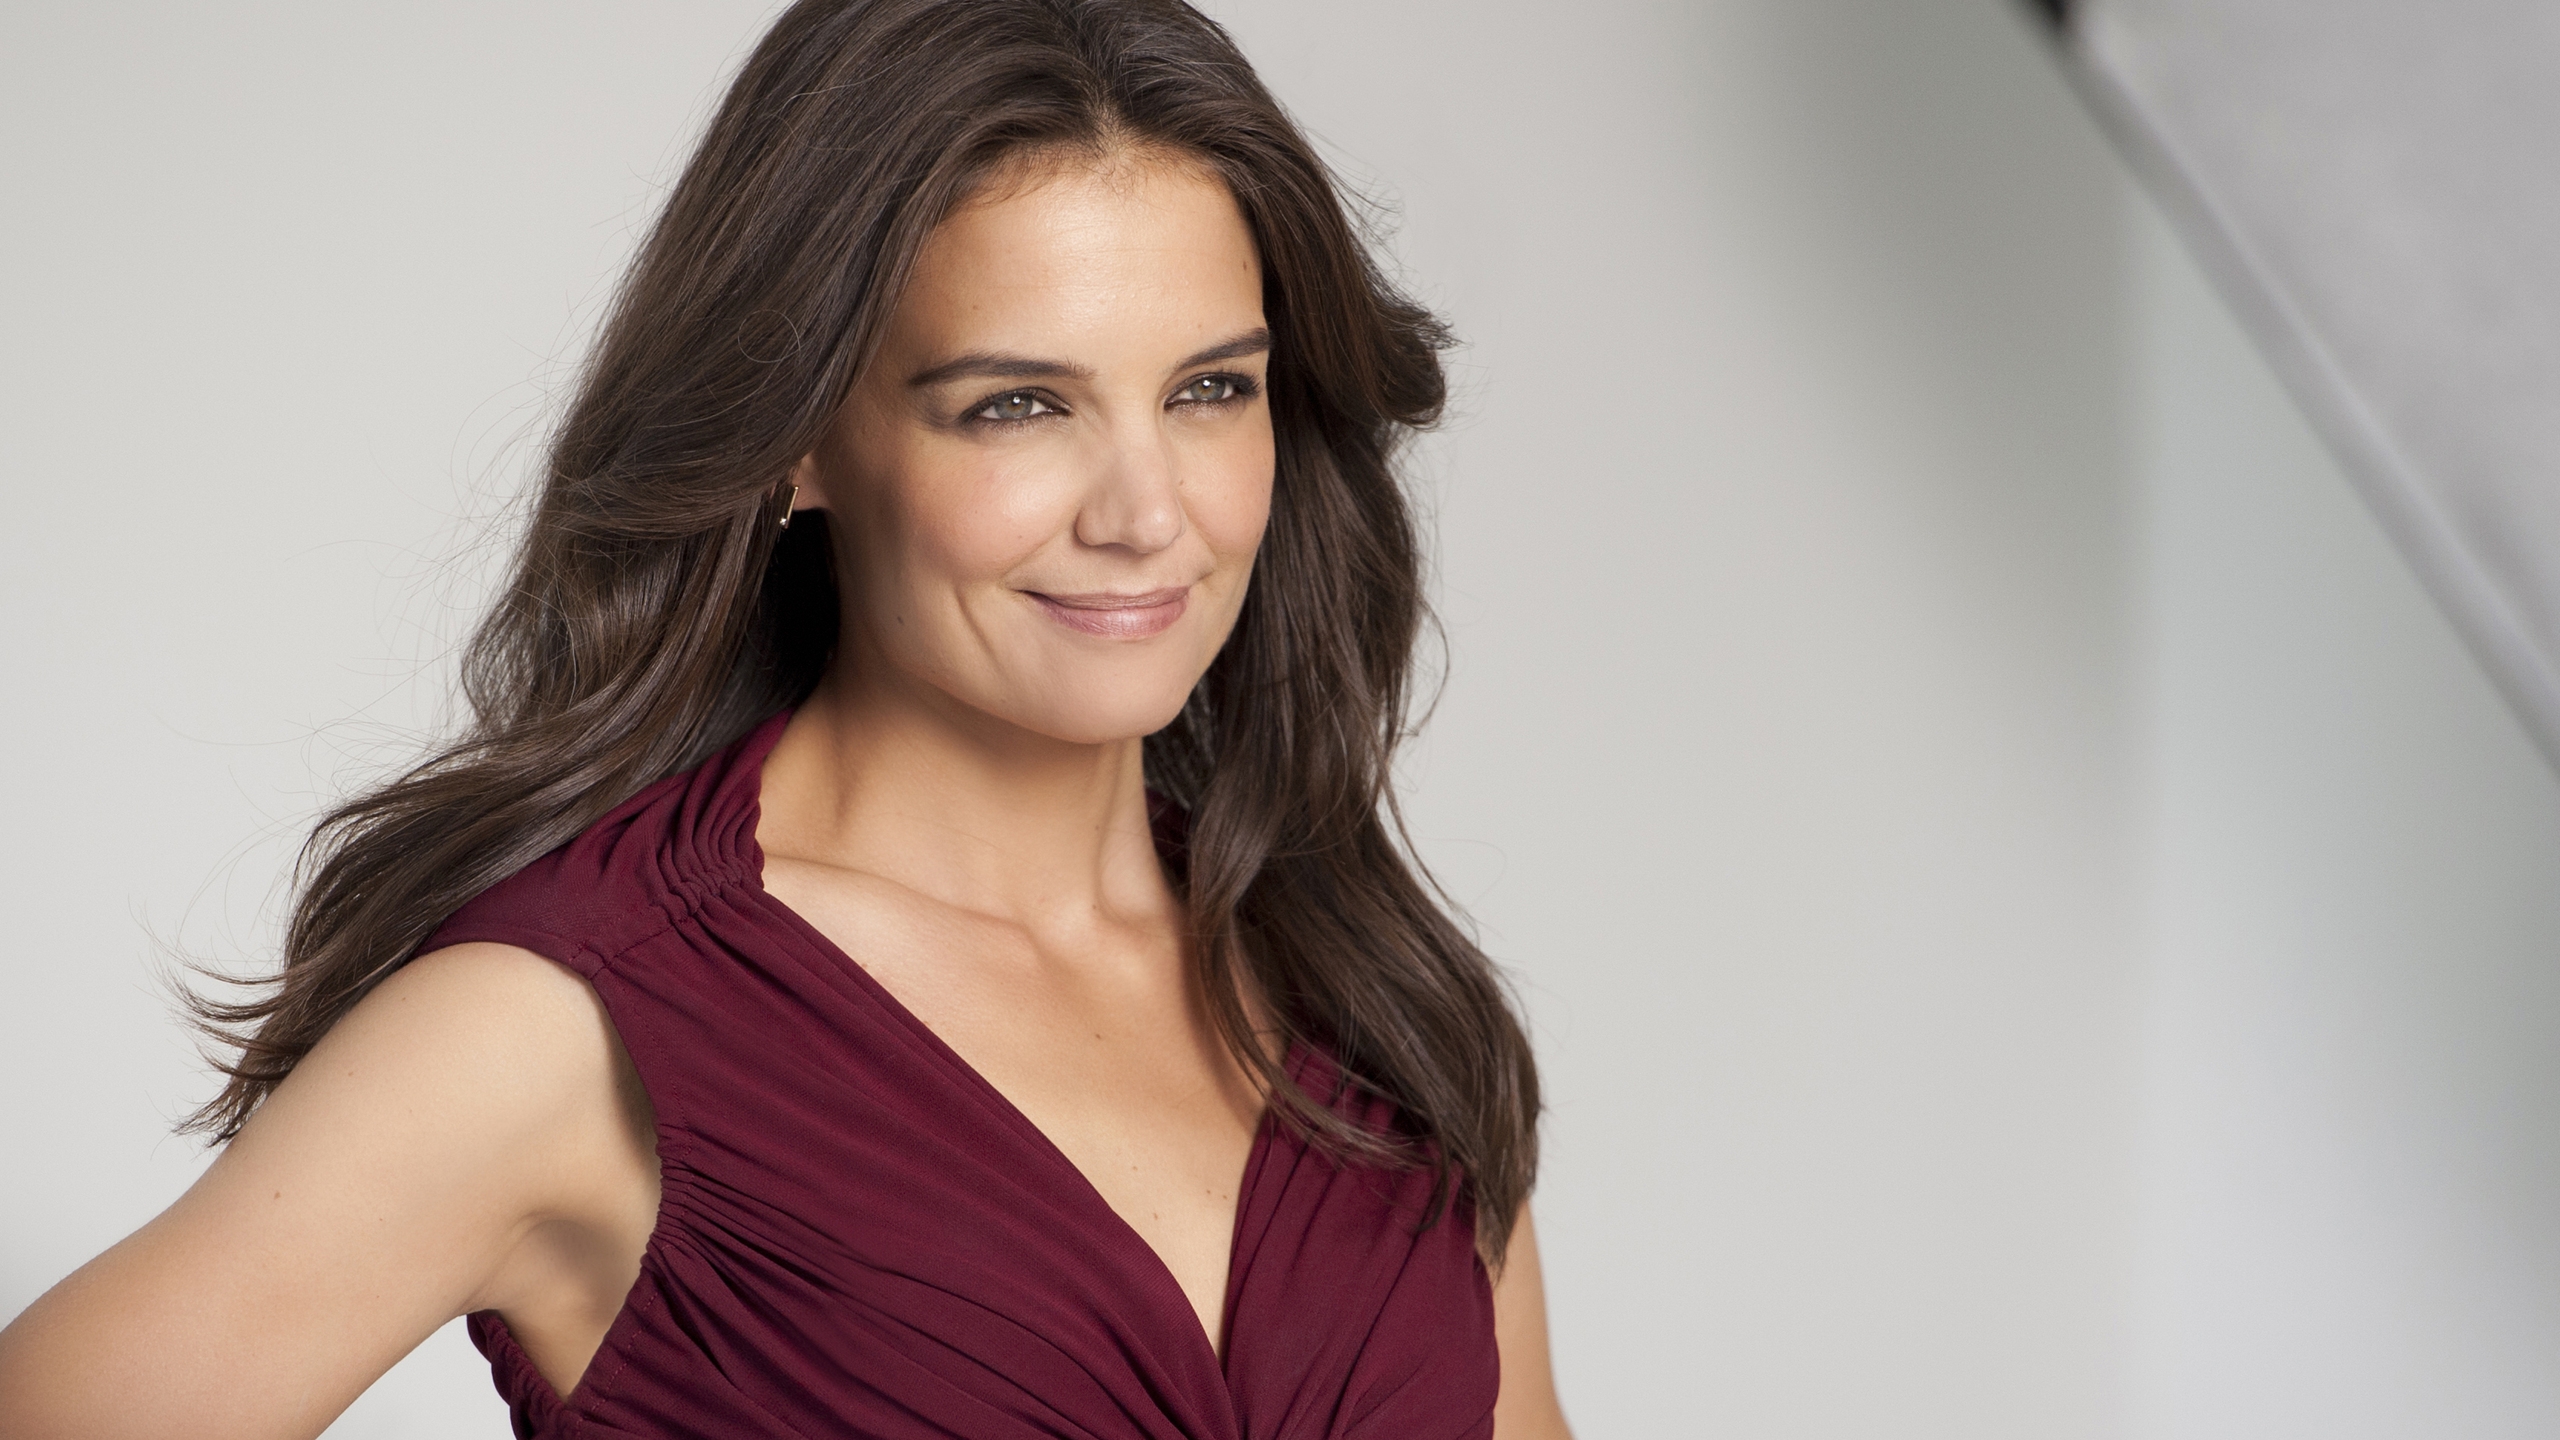 Katie Holmes Wow for 2560x1440 HDTV resolution